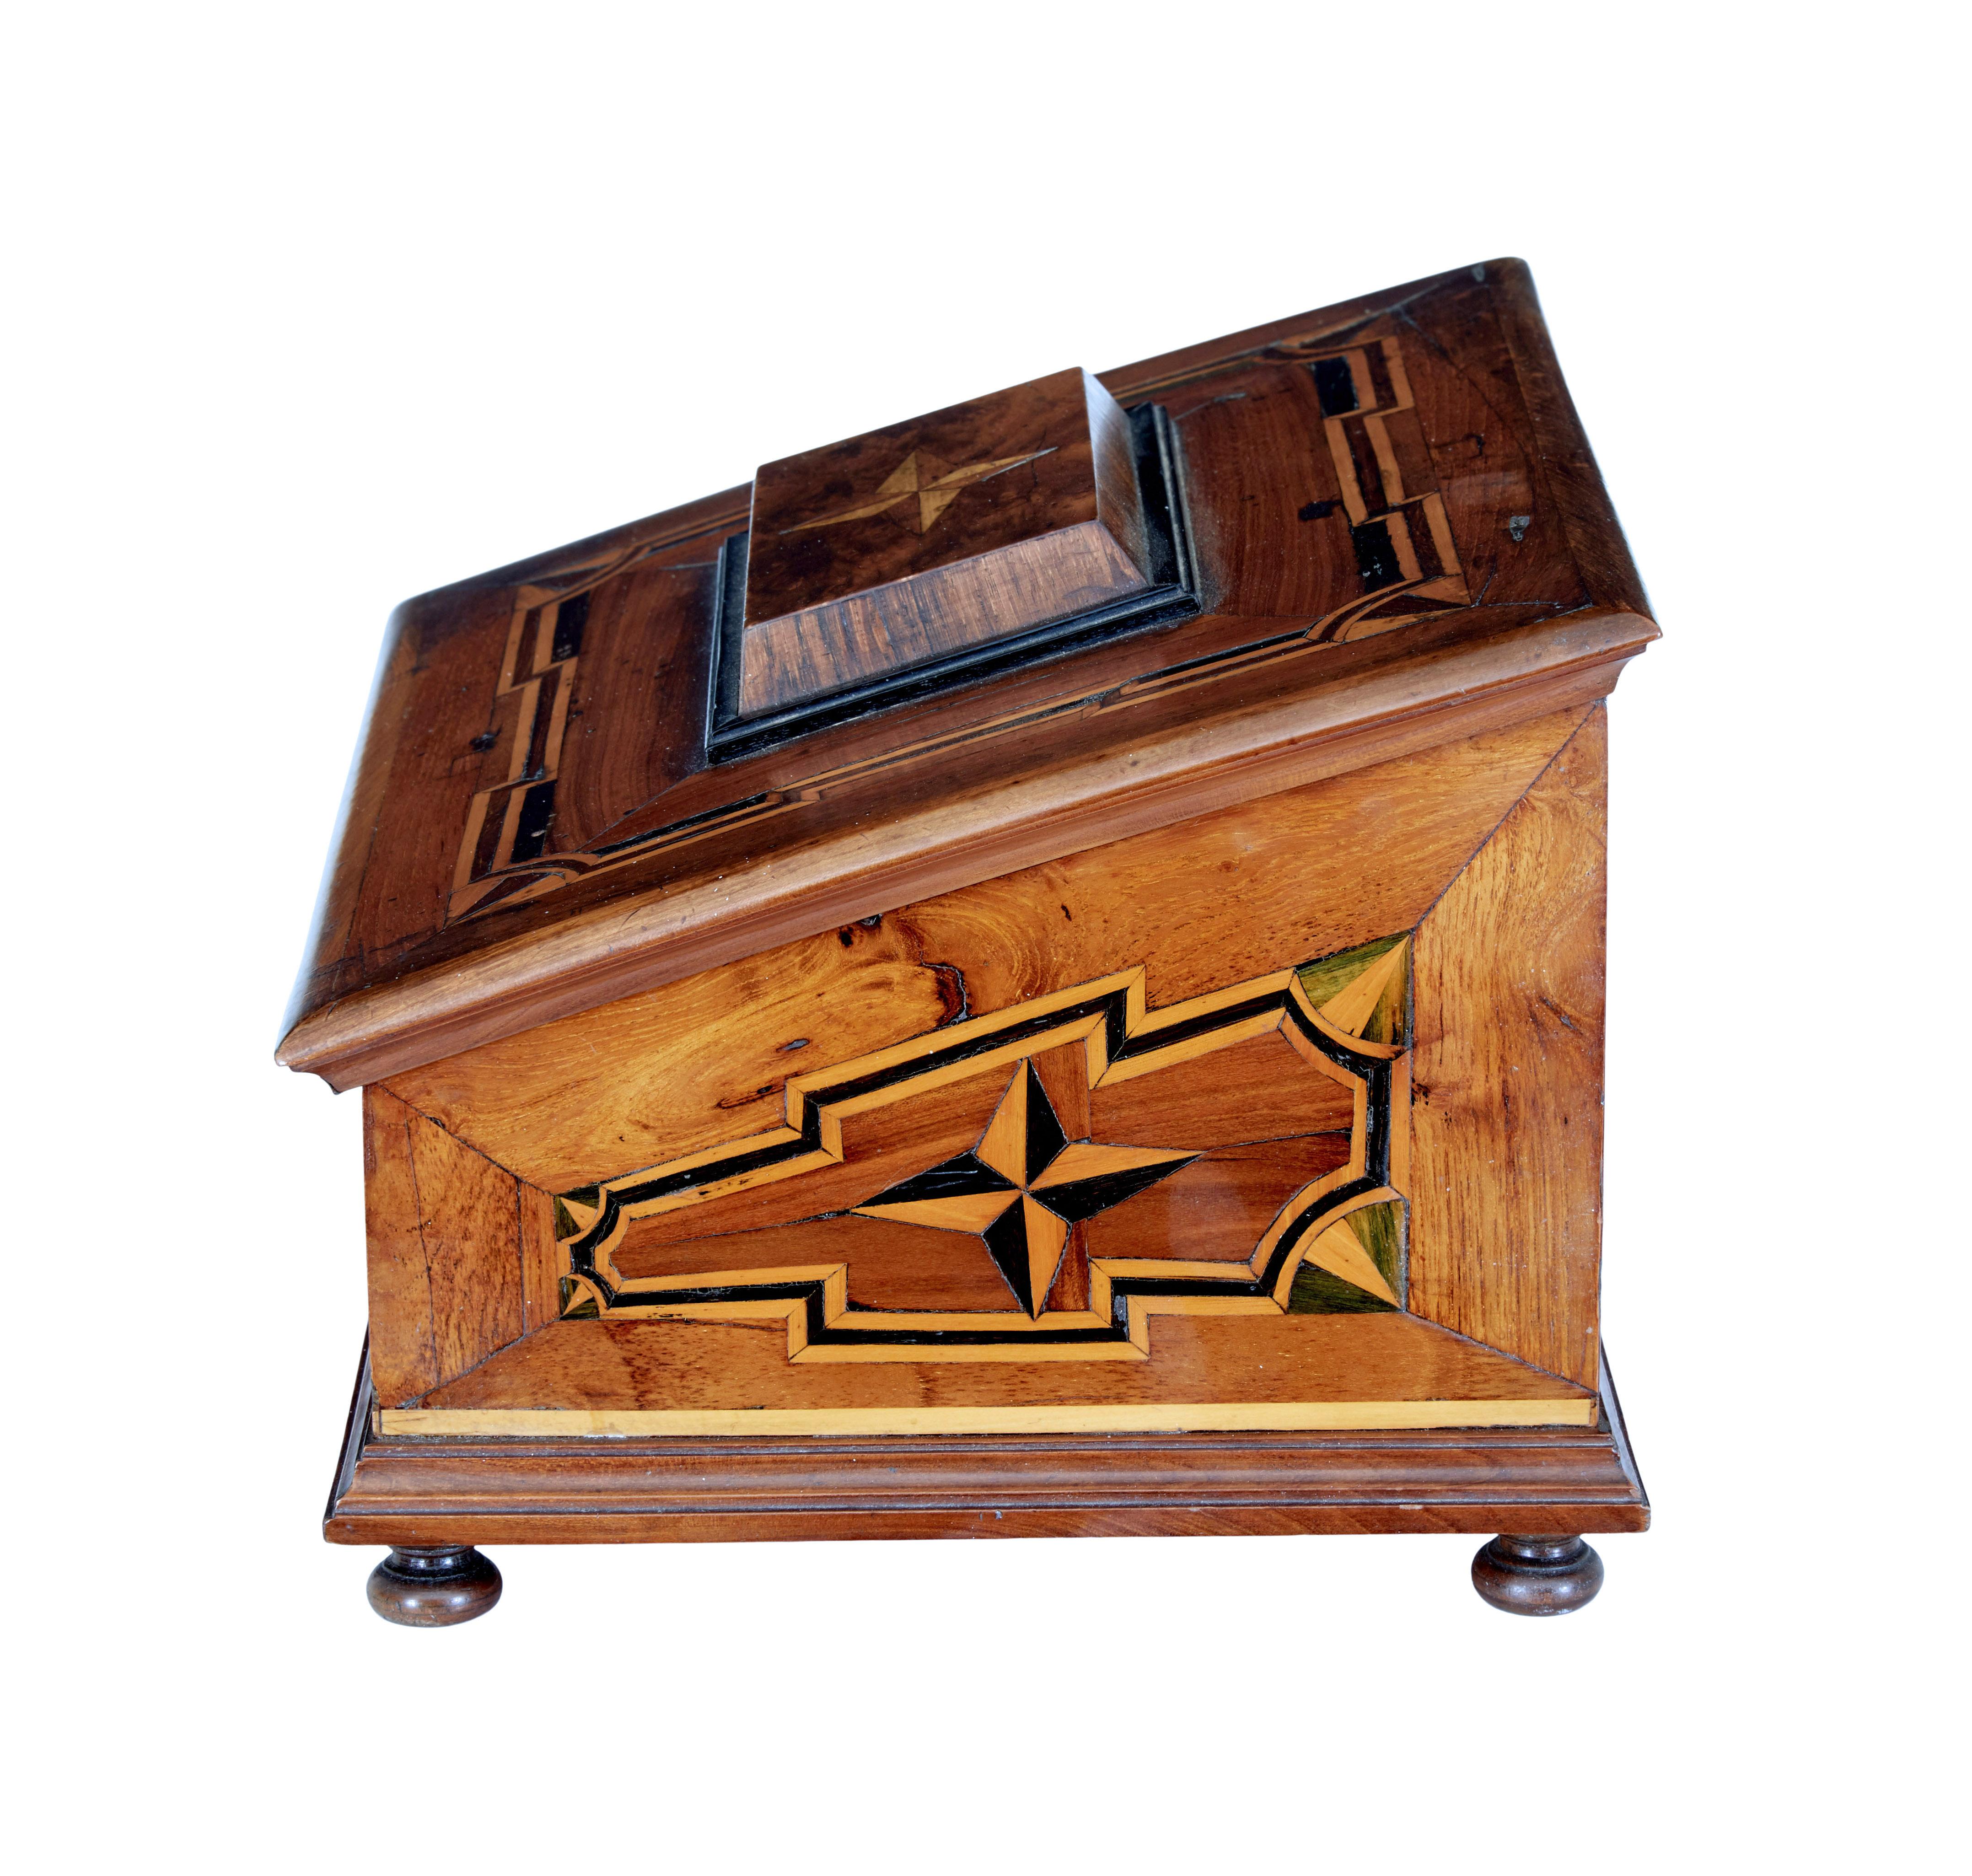 19th century marquetry fruitwood desktop box circa 1890.

Good quality desktop box covered with marquetry on all surfaces. Sloped front with decorative star panel.  Top opens to reveal a partially fitted interior, containing a candle box or for